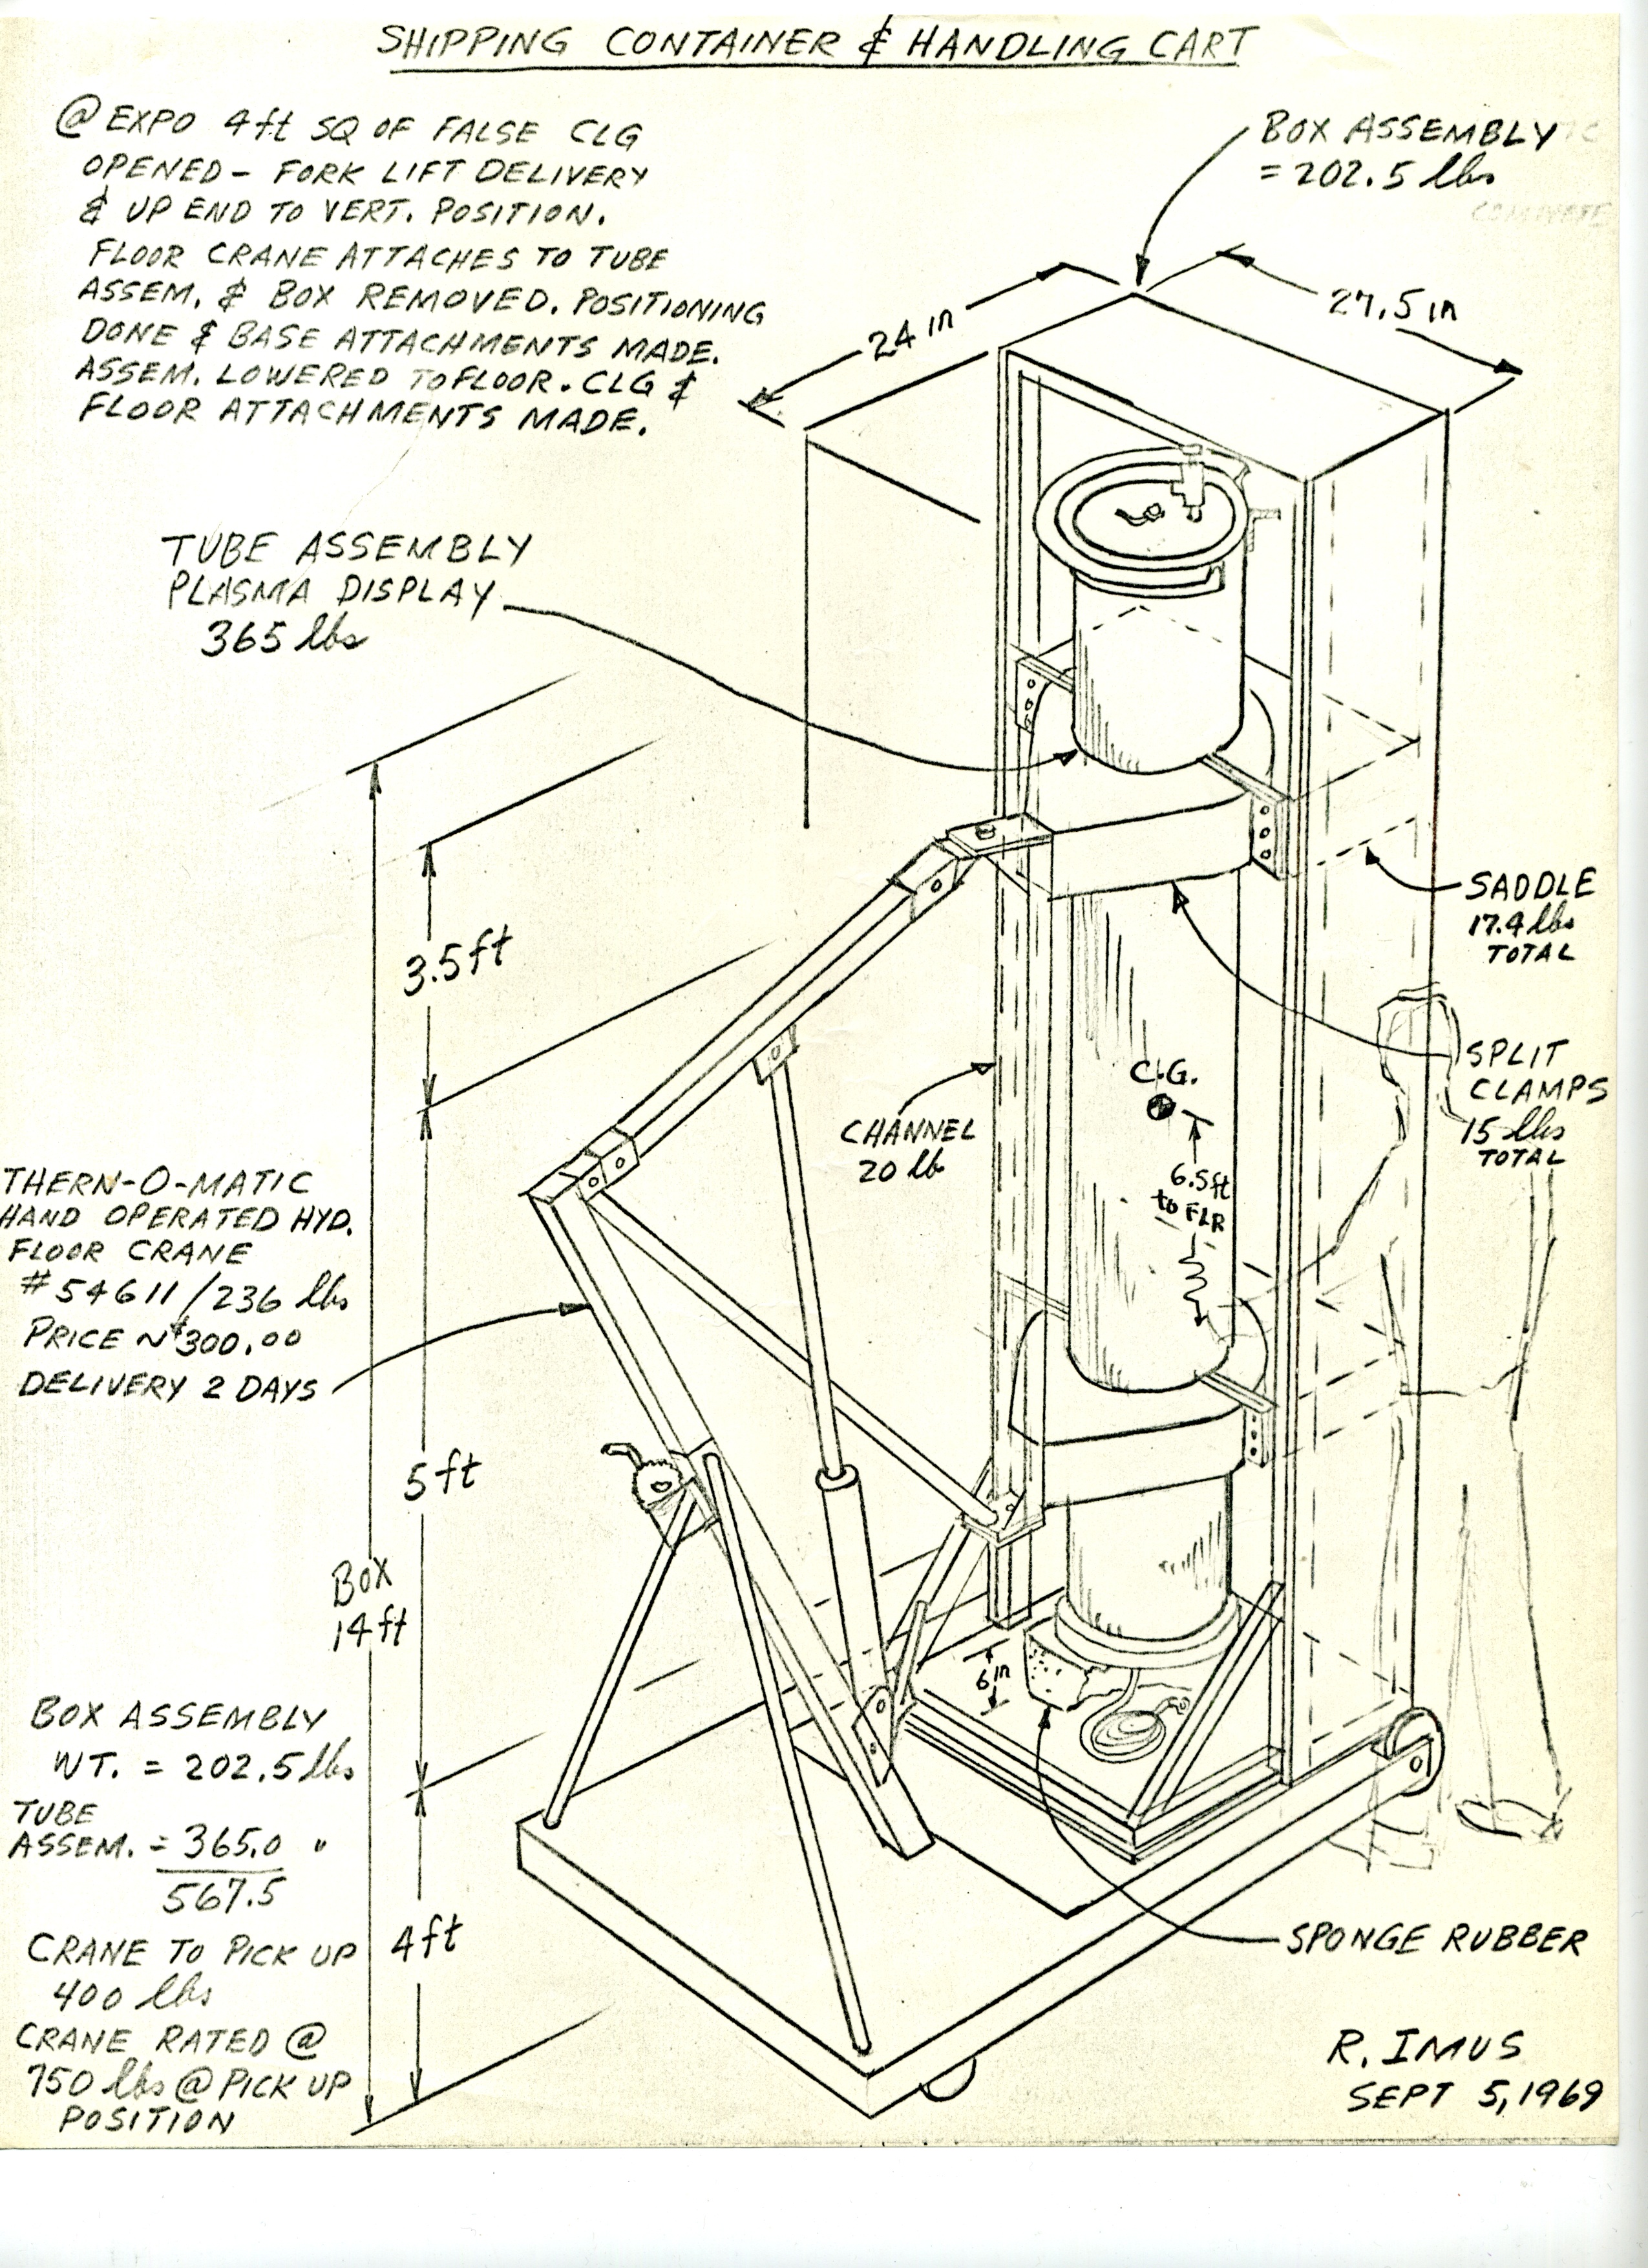 Drawing of shipping container and handling cart made for shipping the gas plasma tubes for Newton Harrison's Art and Technology piece to Osaka, Japan for Expo '70, dated September 5, 1969, Modern Art Department Art and Technology Records, LACMA Balch Art Research Library, MOD.001.001. Click to view full-sized image.